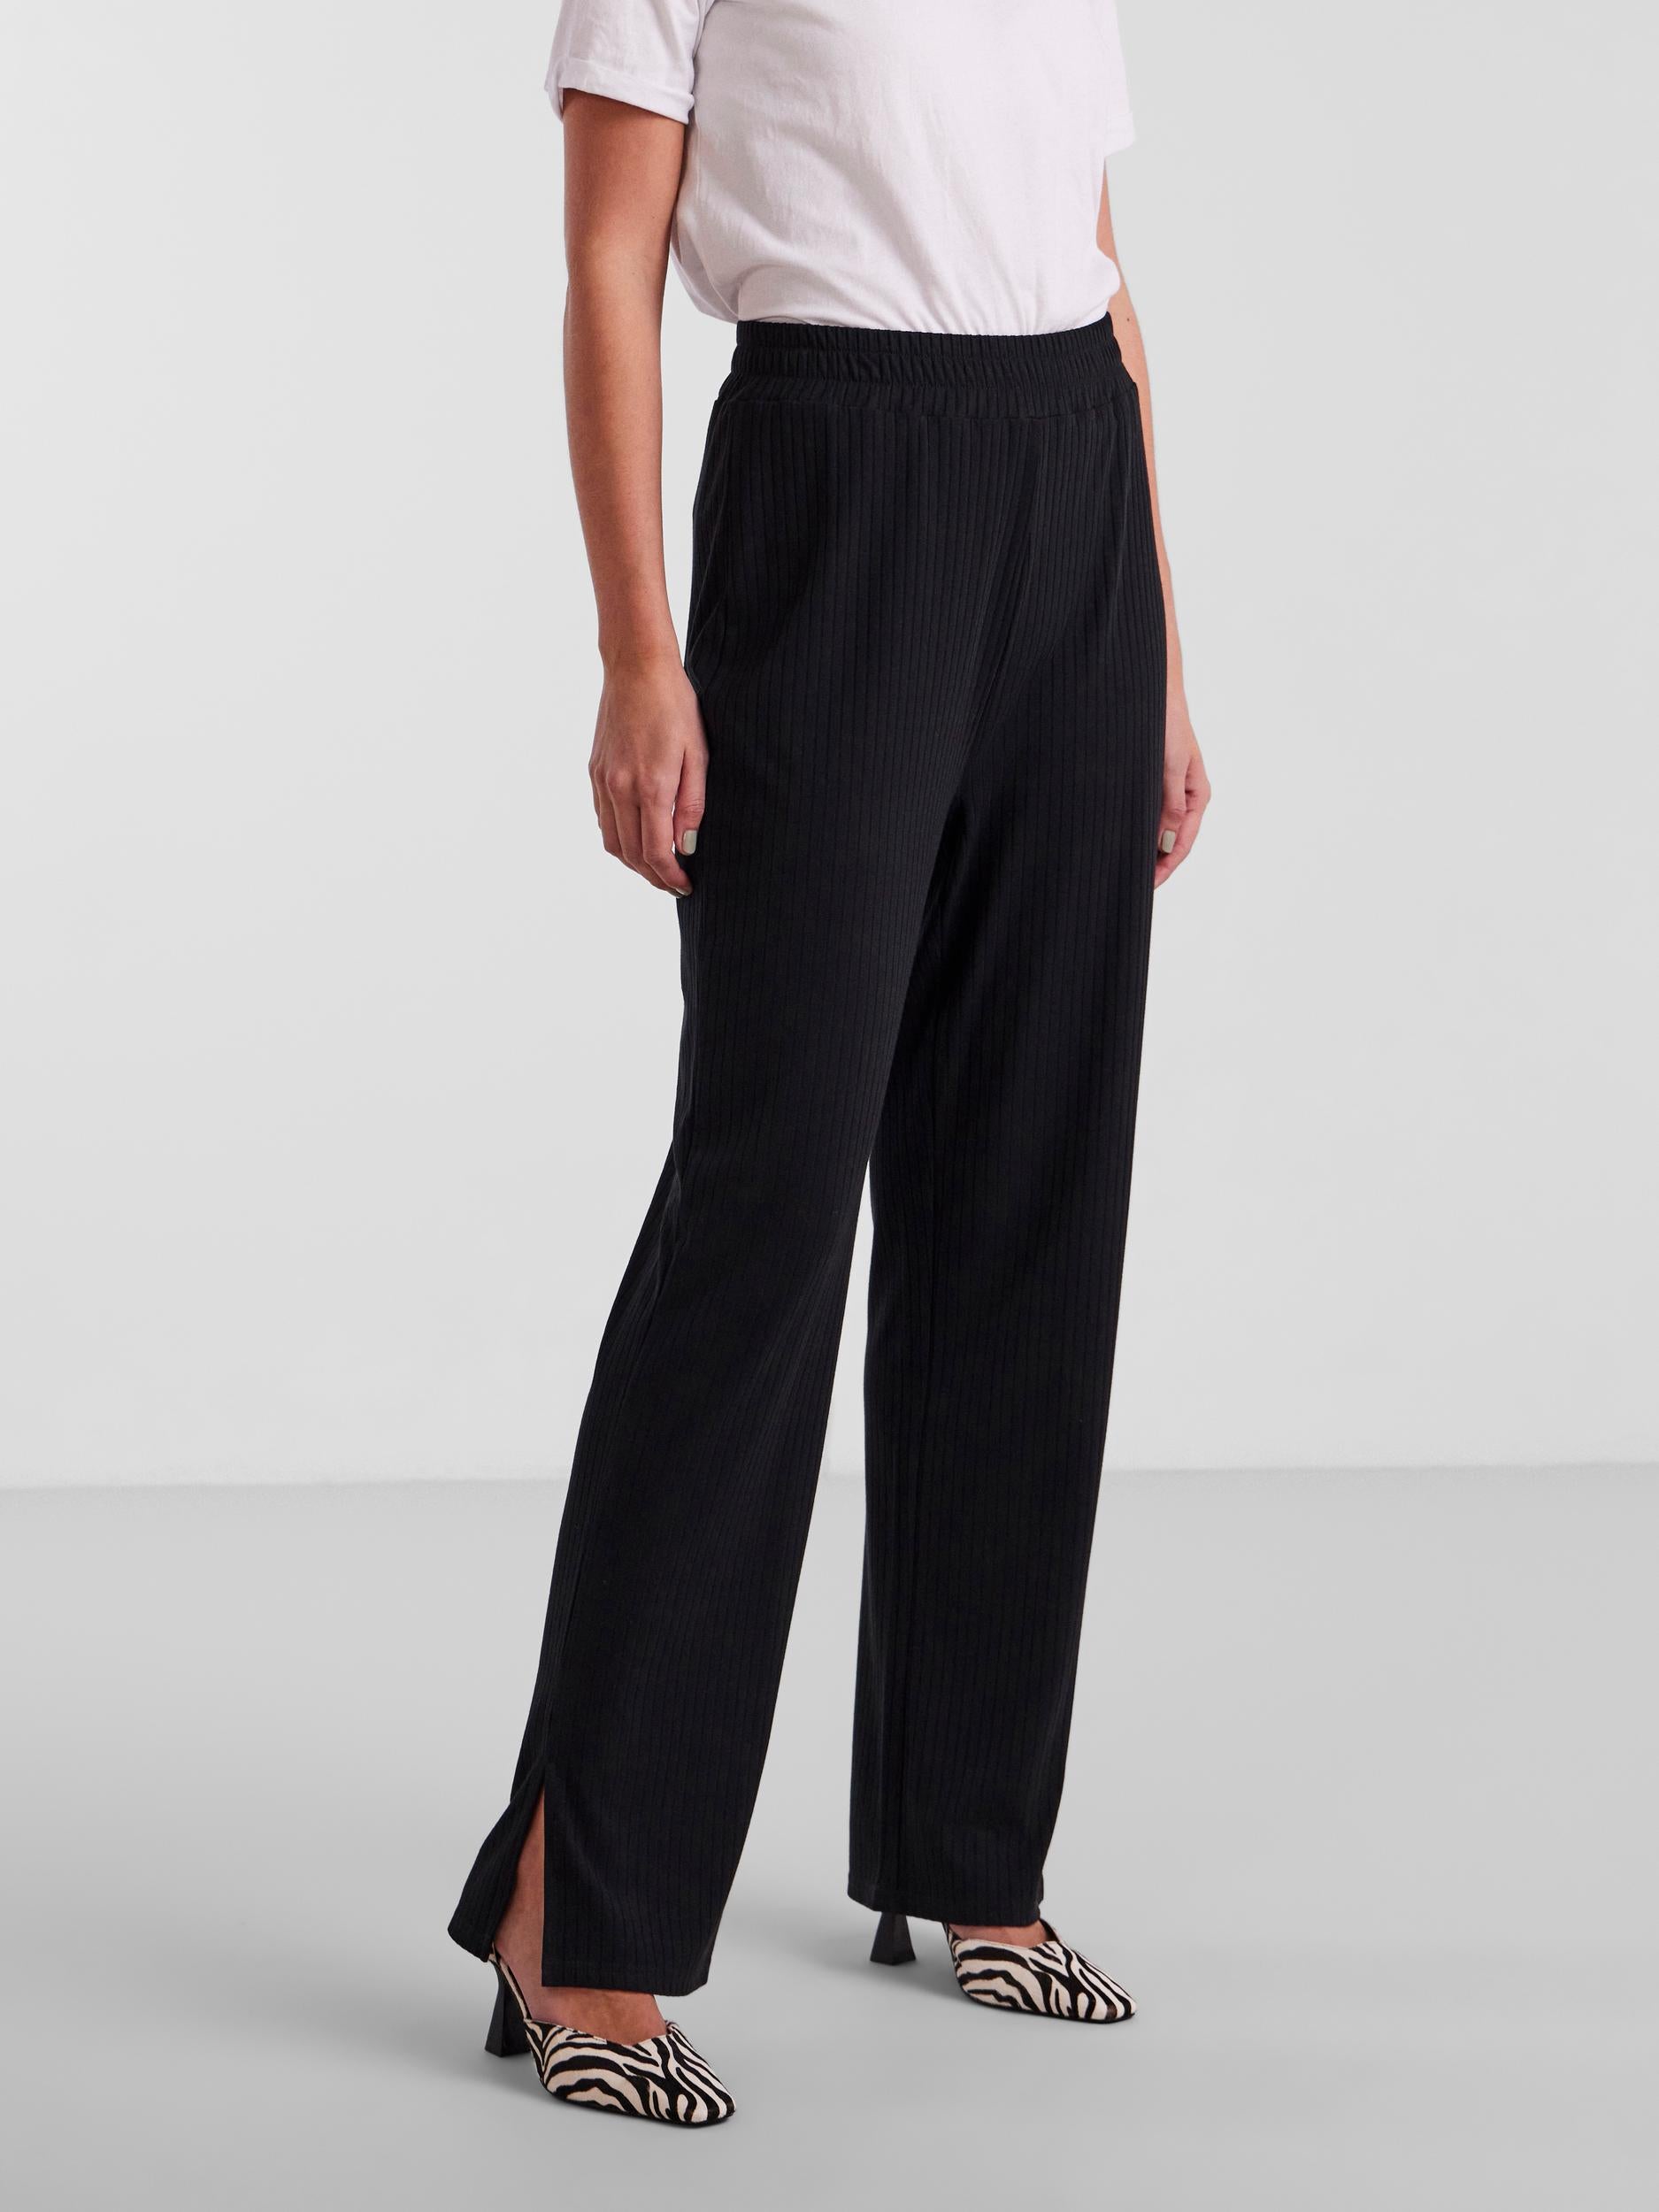 Pieces black ribbed trousers with vents